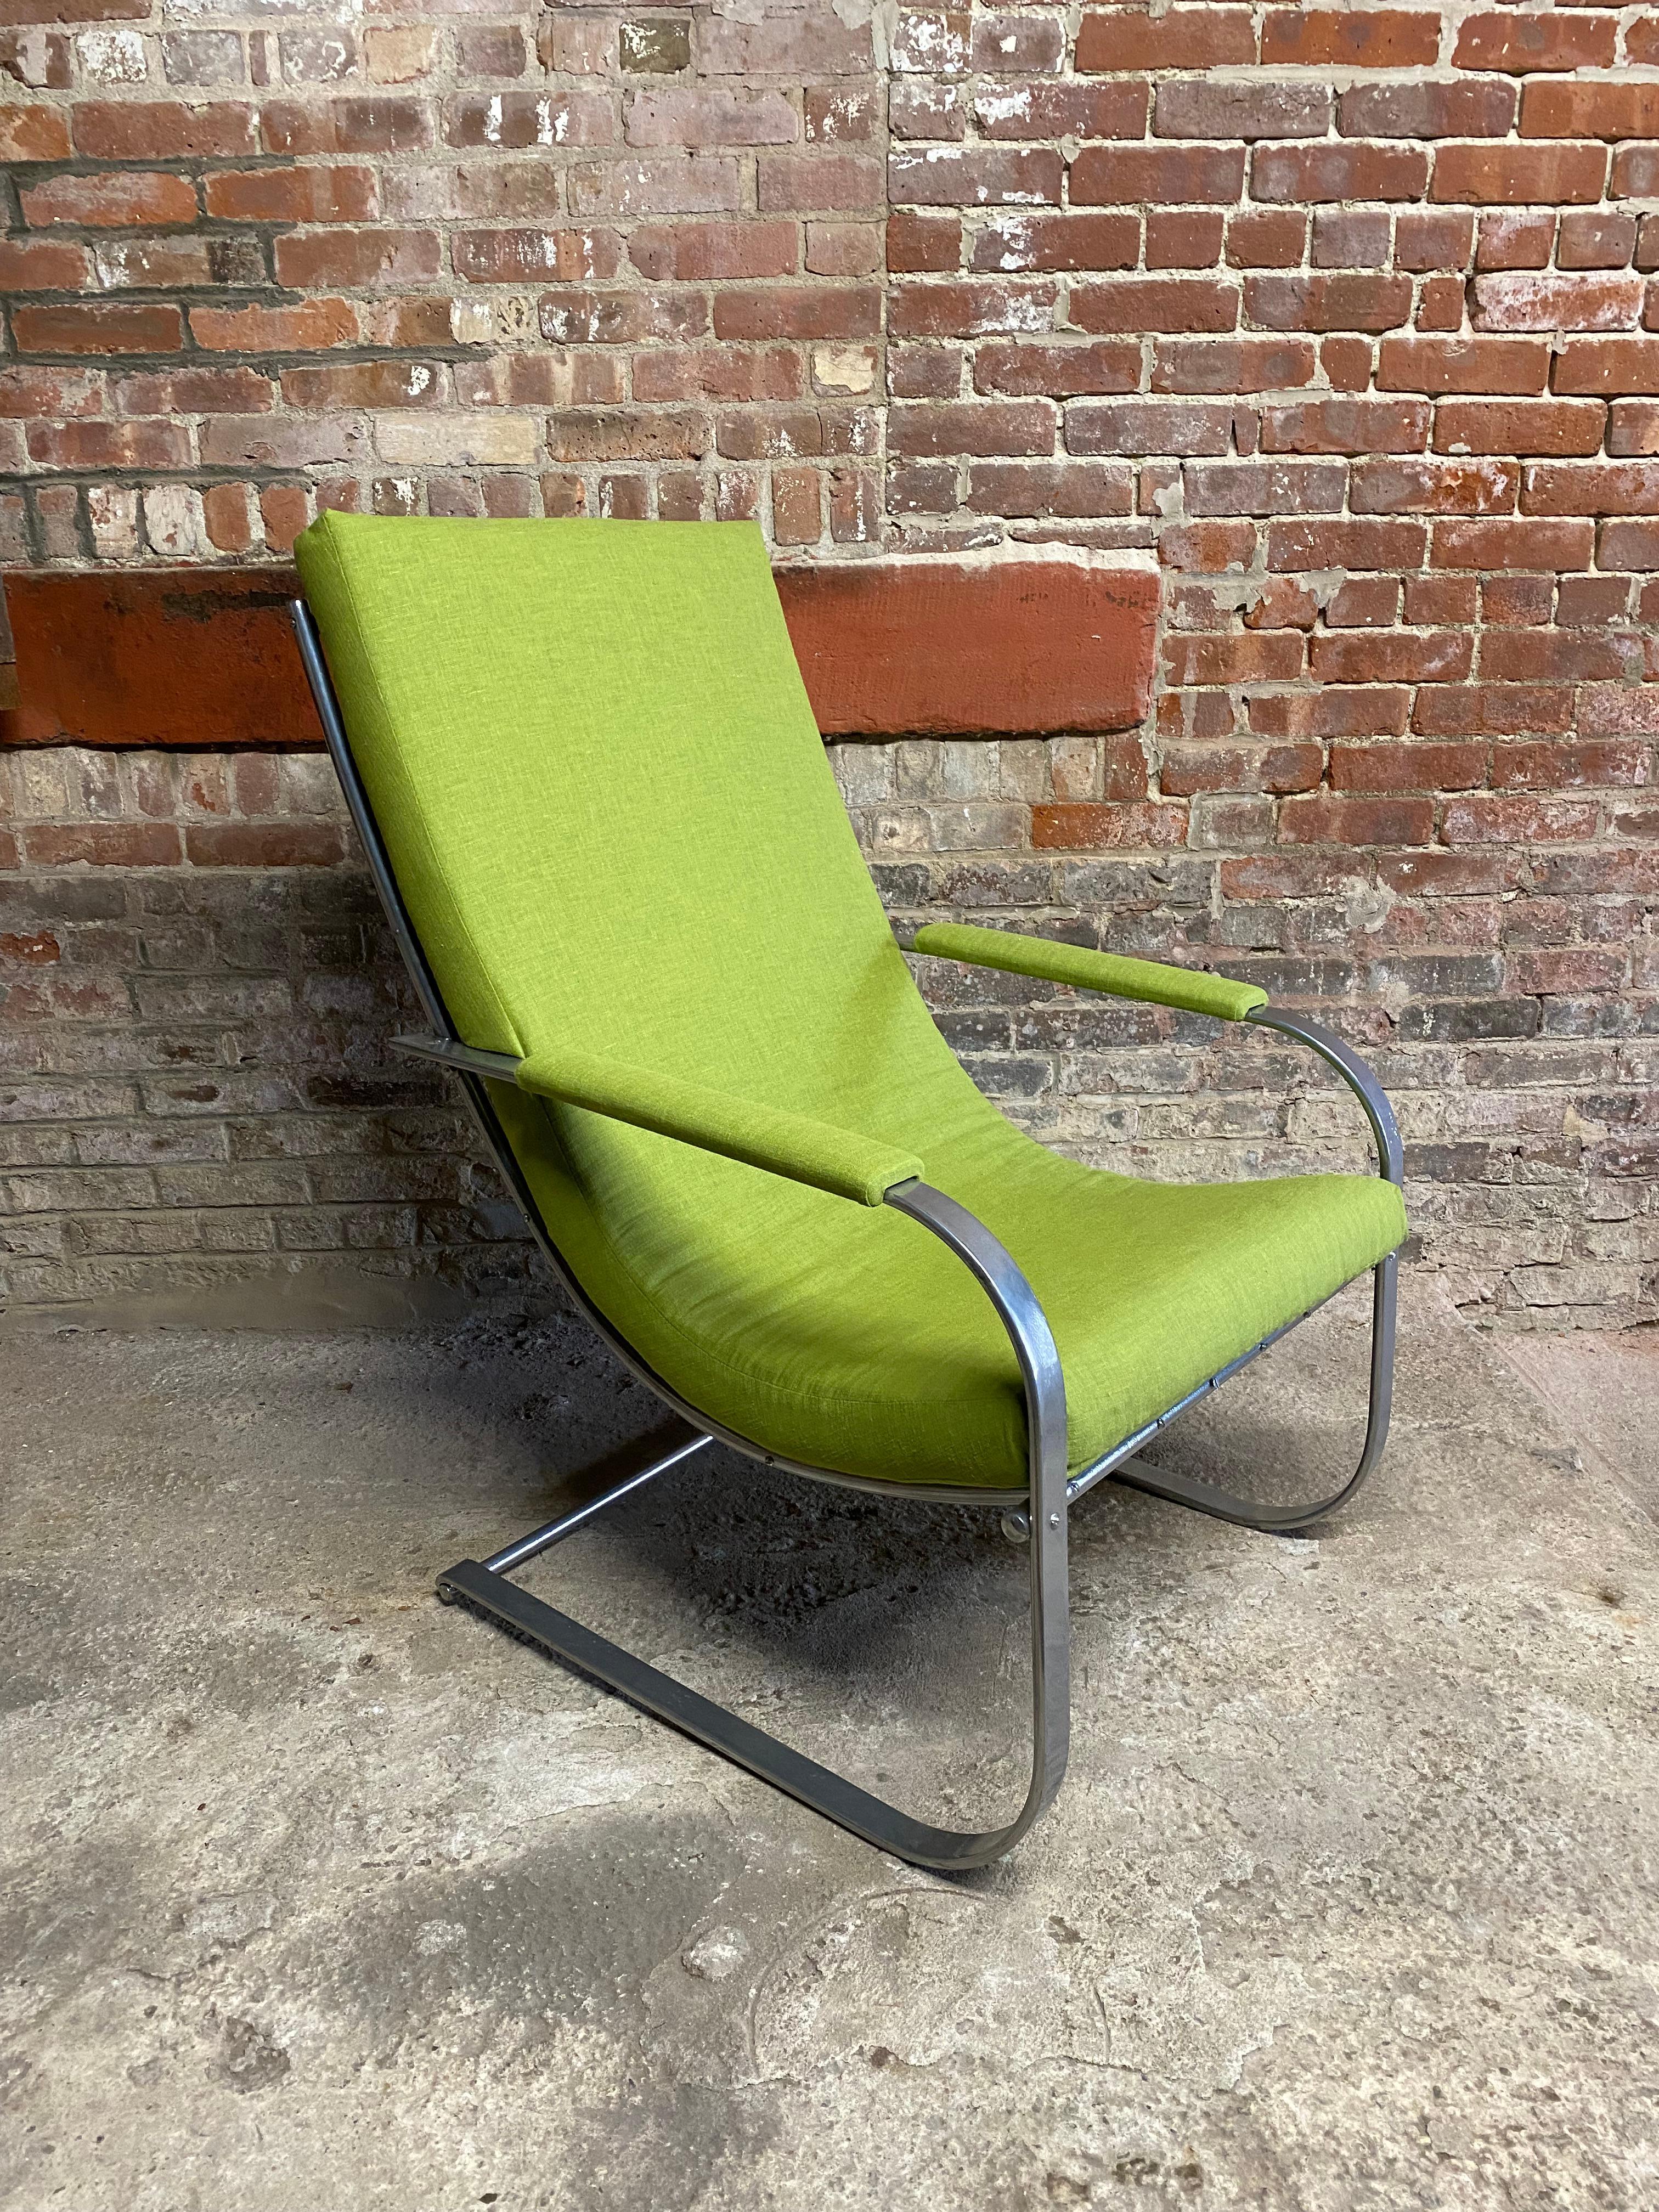 Gilbert Rohde fro Troy Sunshade Model #180 upholstered cantilever chair. Circa 1939. New cushion in chartreuse fabric. Good restored condition. Not the original chrome electroplating, but most likely a metal powder coating. Structurally sound and